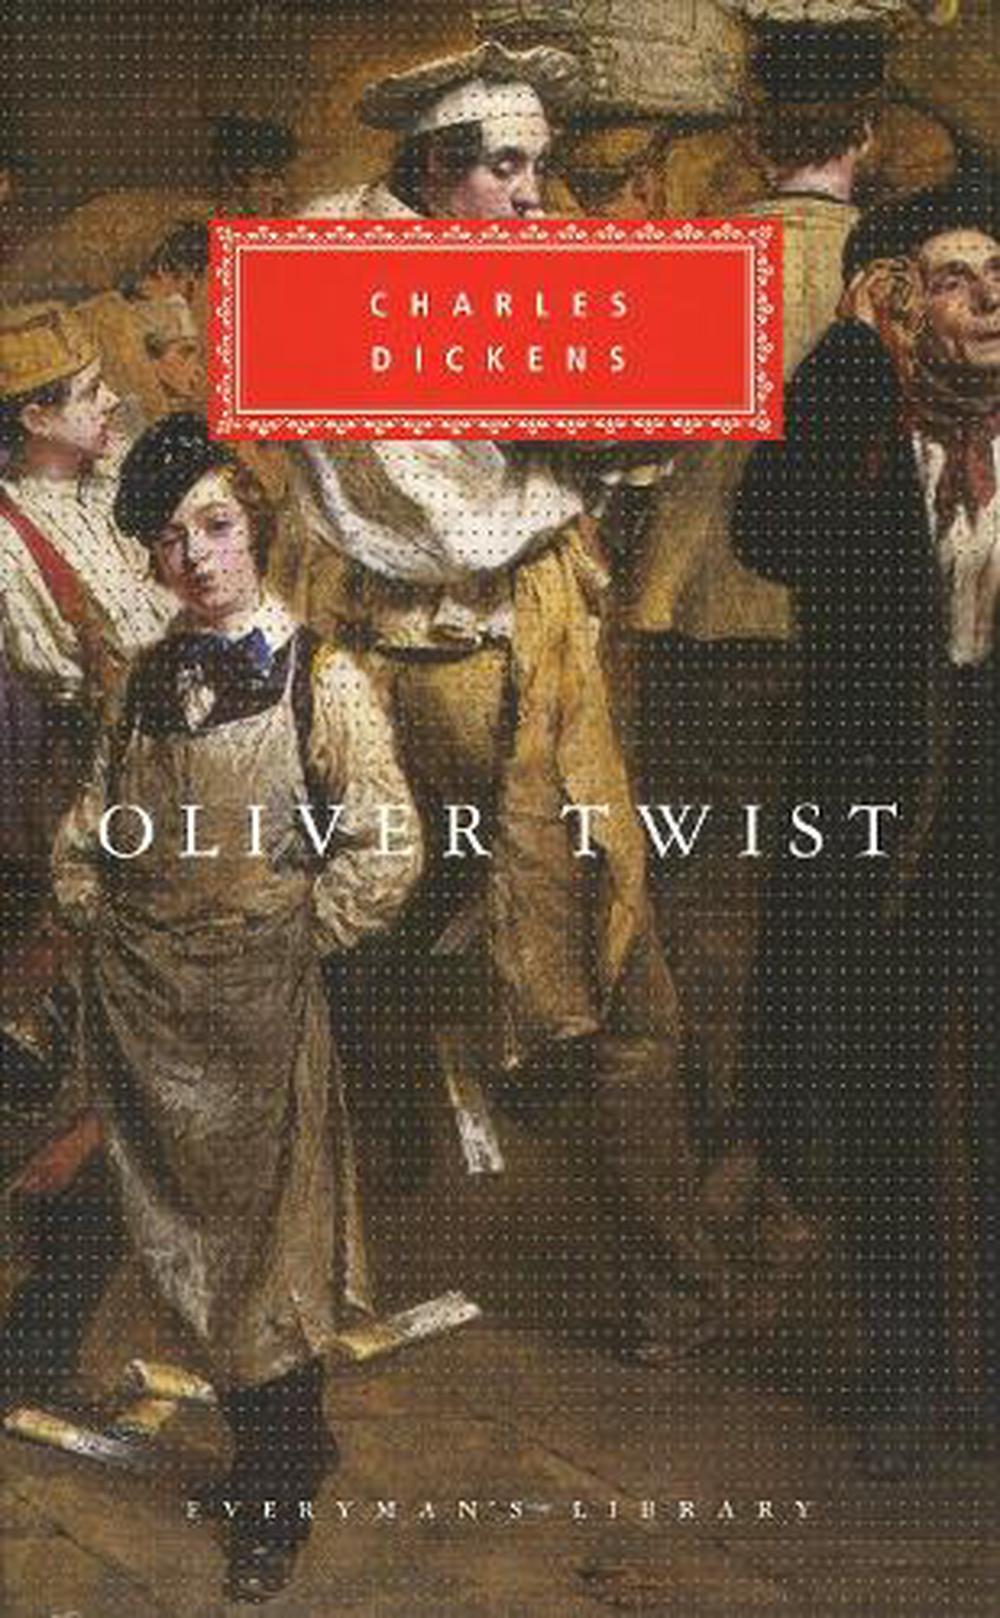 oliver charles dickens